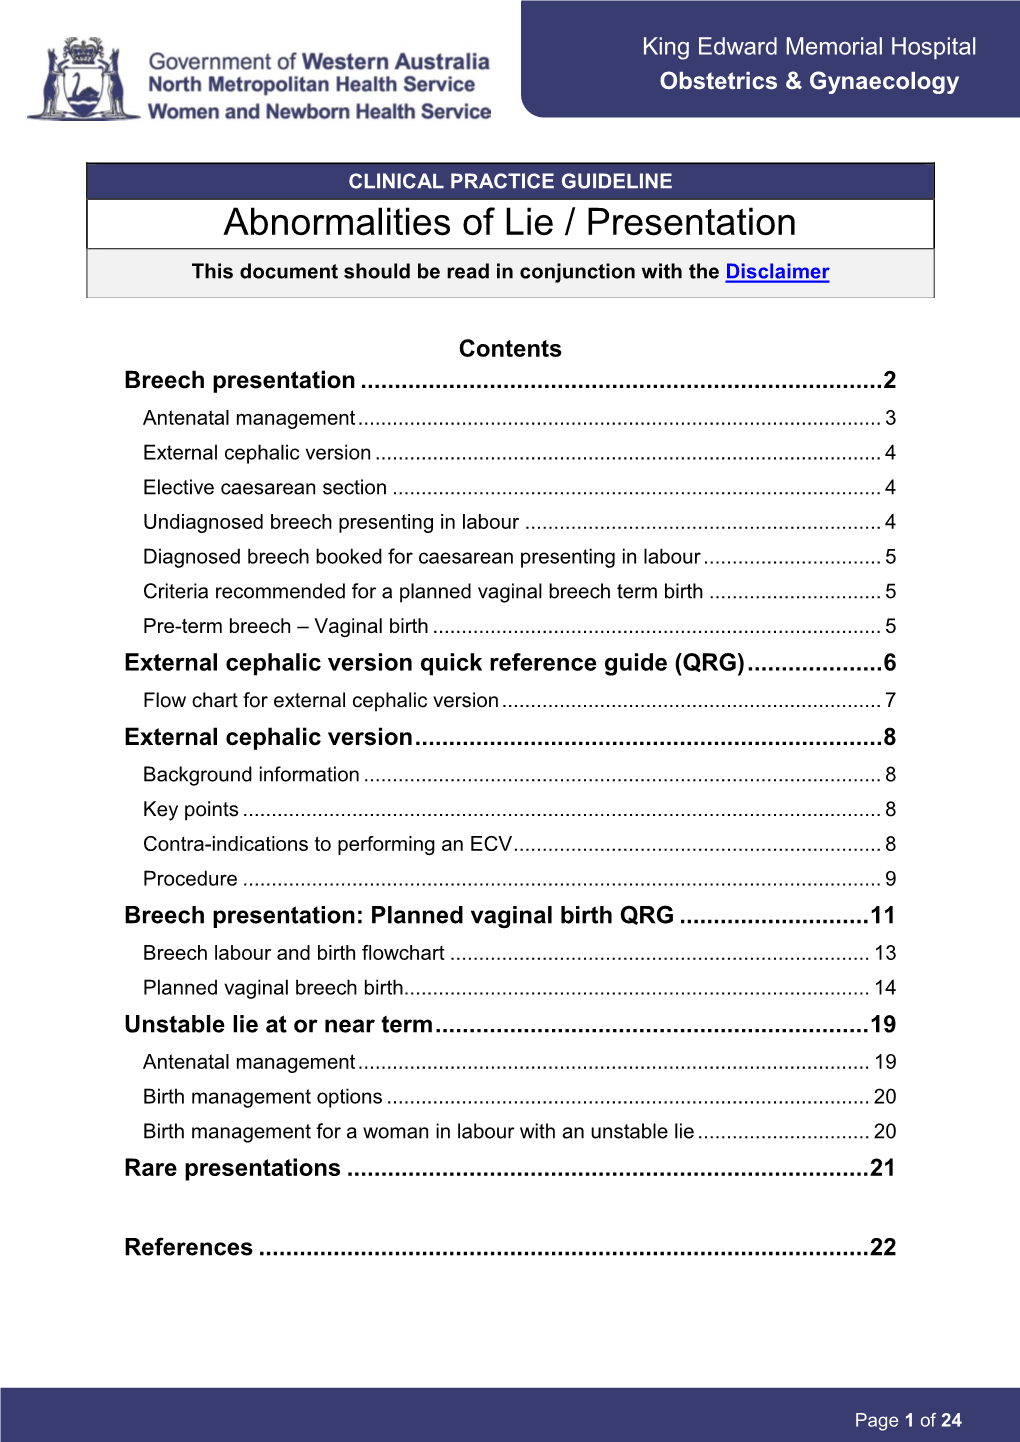 KEMH Clinical Practice Guideline- Abnormalities of Lie/Presentation